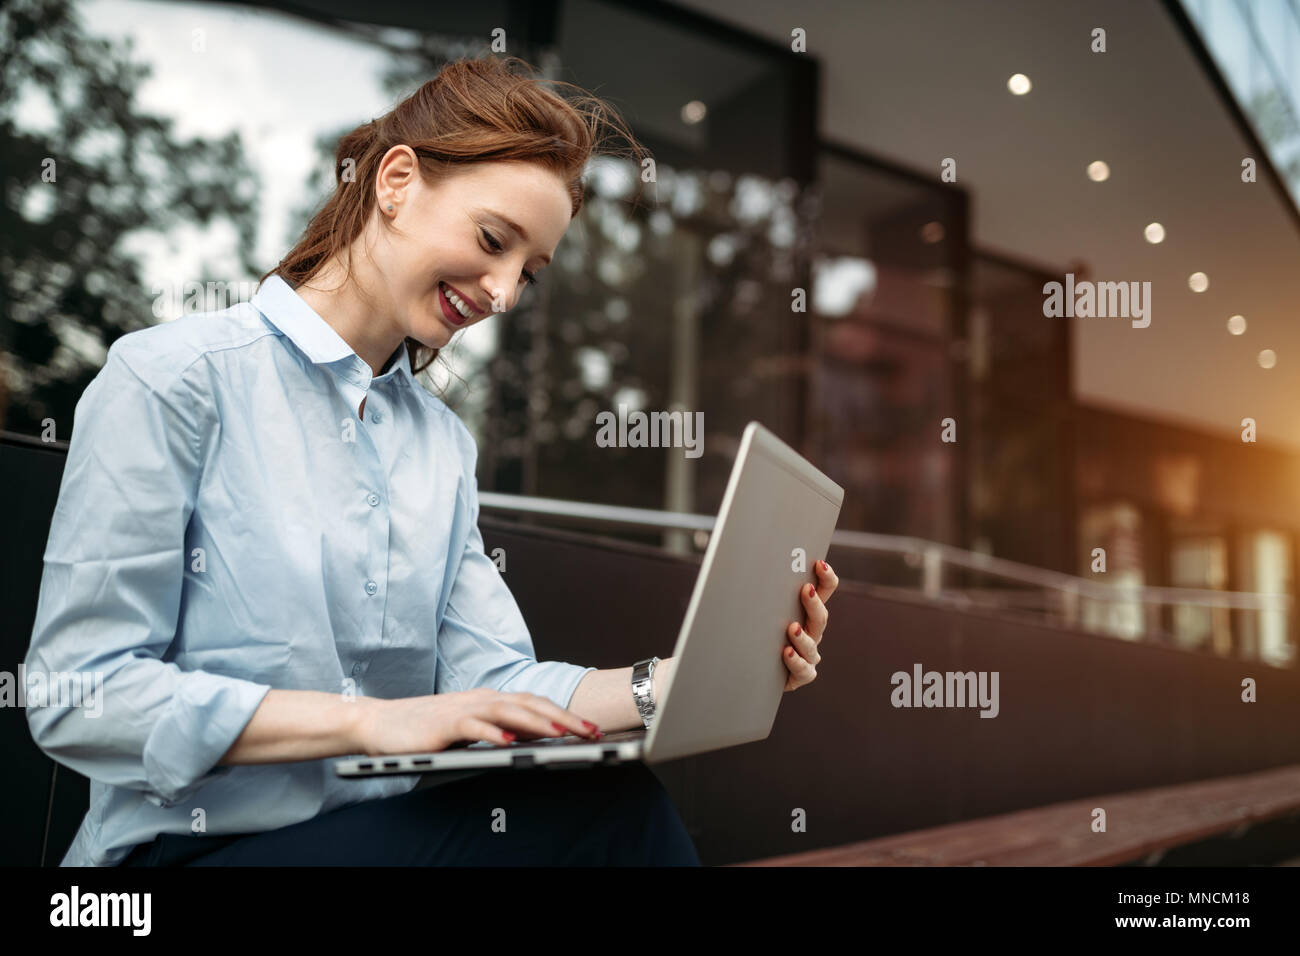 Portrait of pretty student ou businesswoman in smart casual using digital tablet Banque D'Images